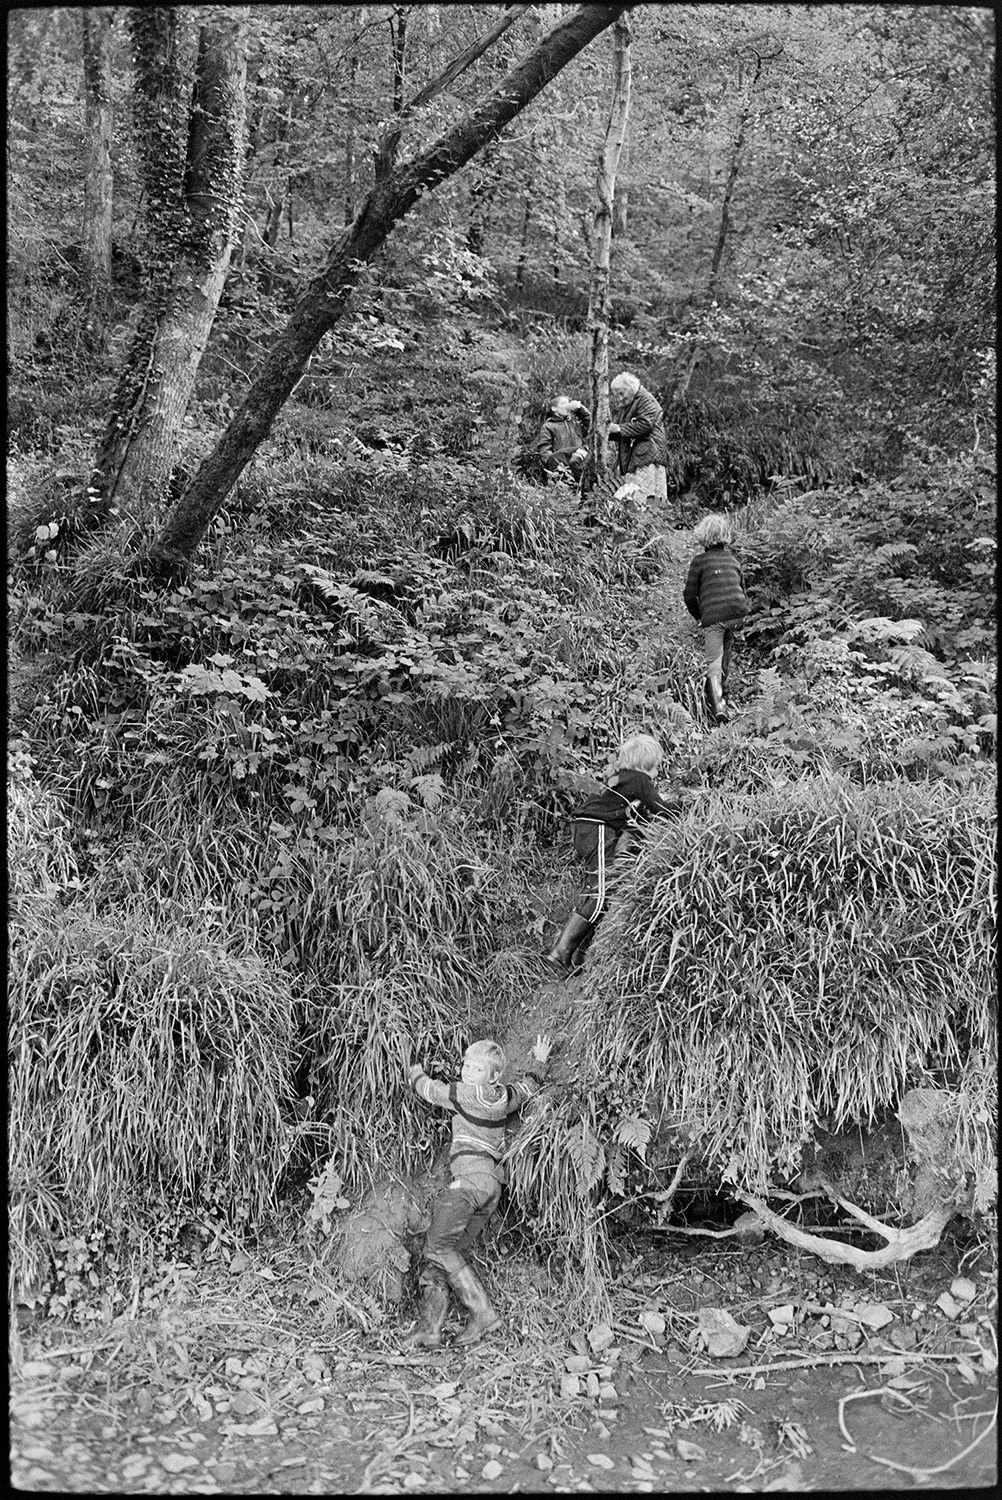 Children playing beside river with ruined mill.
[Children climbing a muddy bank by the River Torridge near Dolton Mill at Halsdon, Dolton. A woman is waiting with a child on a path at the top of the bank, by trees.]